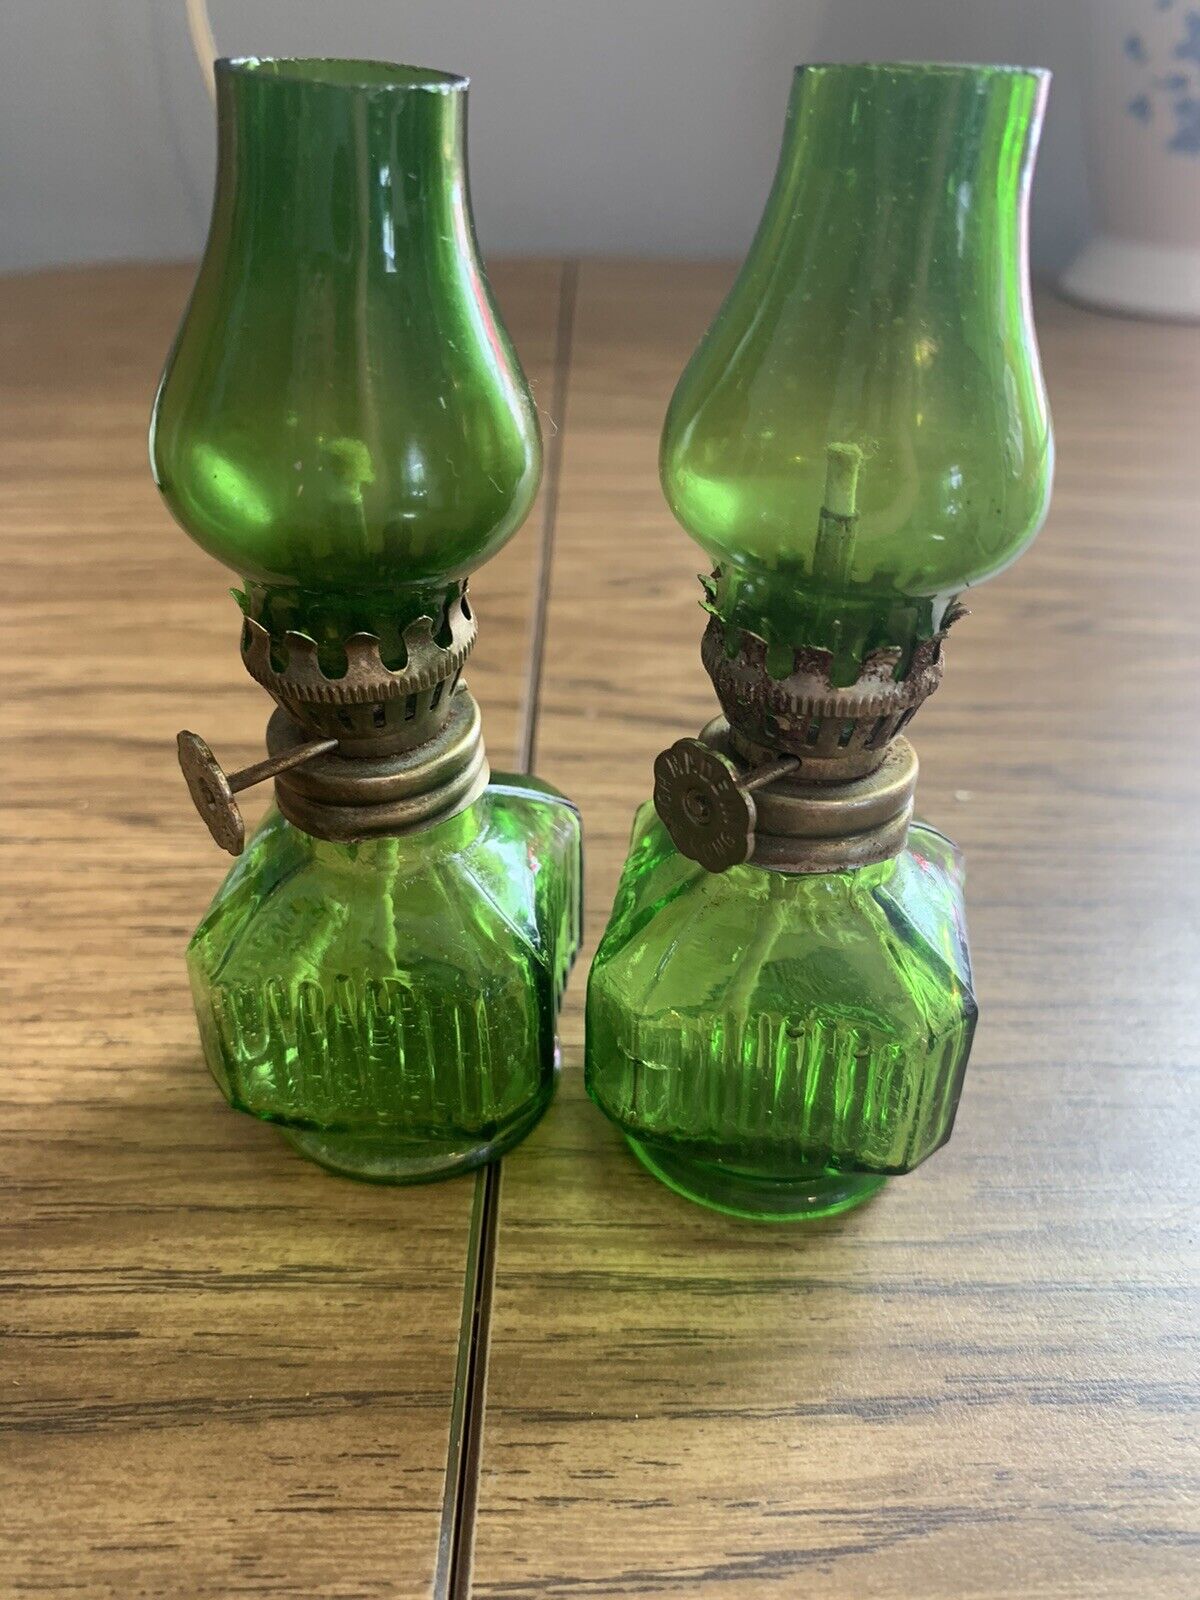 Miniature glass oil lamp with wick, antique. Green glass, approx 3.5 inches tall